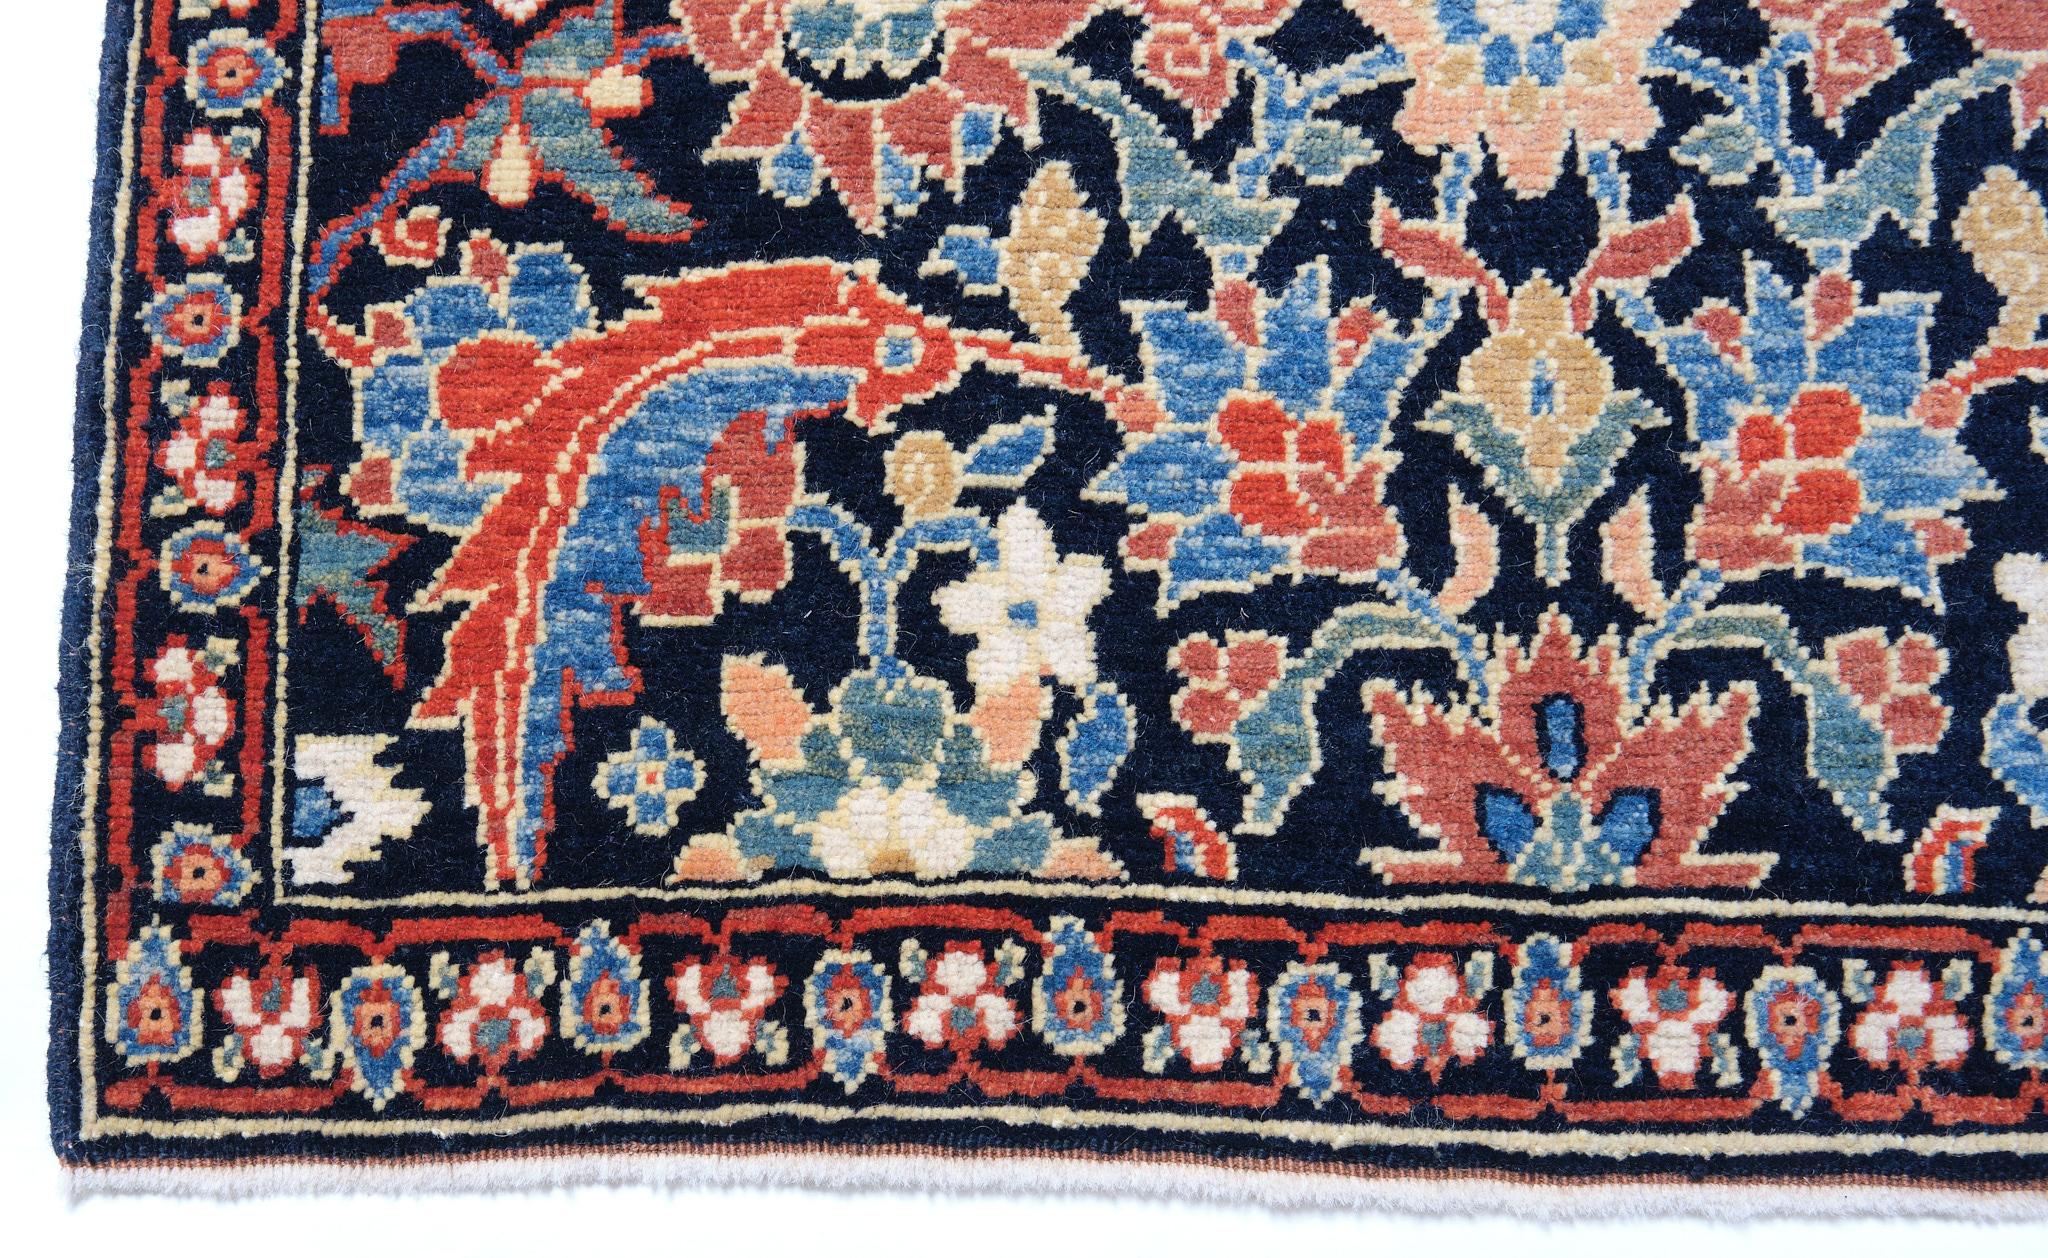 The source of the rug comes from the book Antique Rugs of Kurdistan A Historical Legacy of Woven Art, James D. Burns, 2002 nr.31. This blue background rug has a variation of masi awita (fish around the lotus) pattern from Senna, Eastern Kurdistan